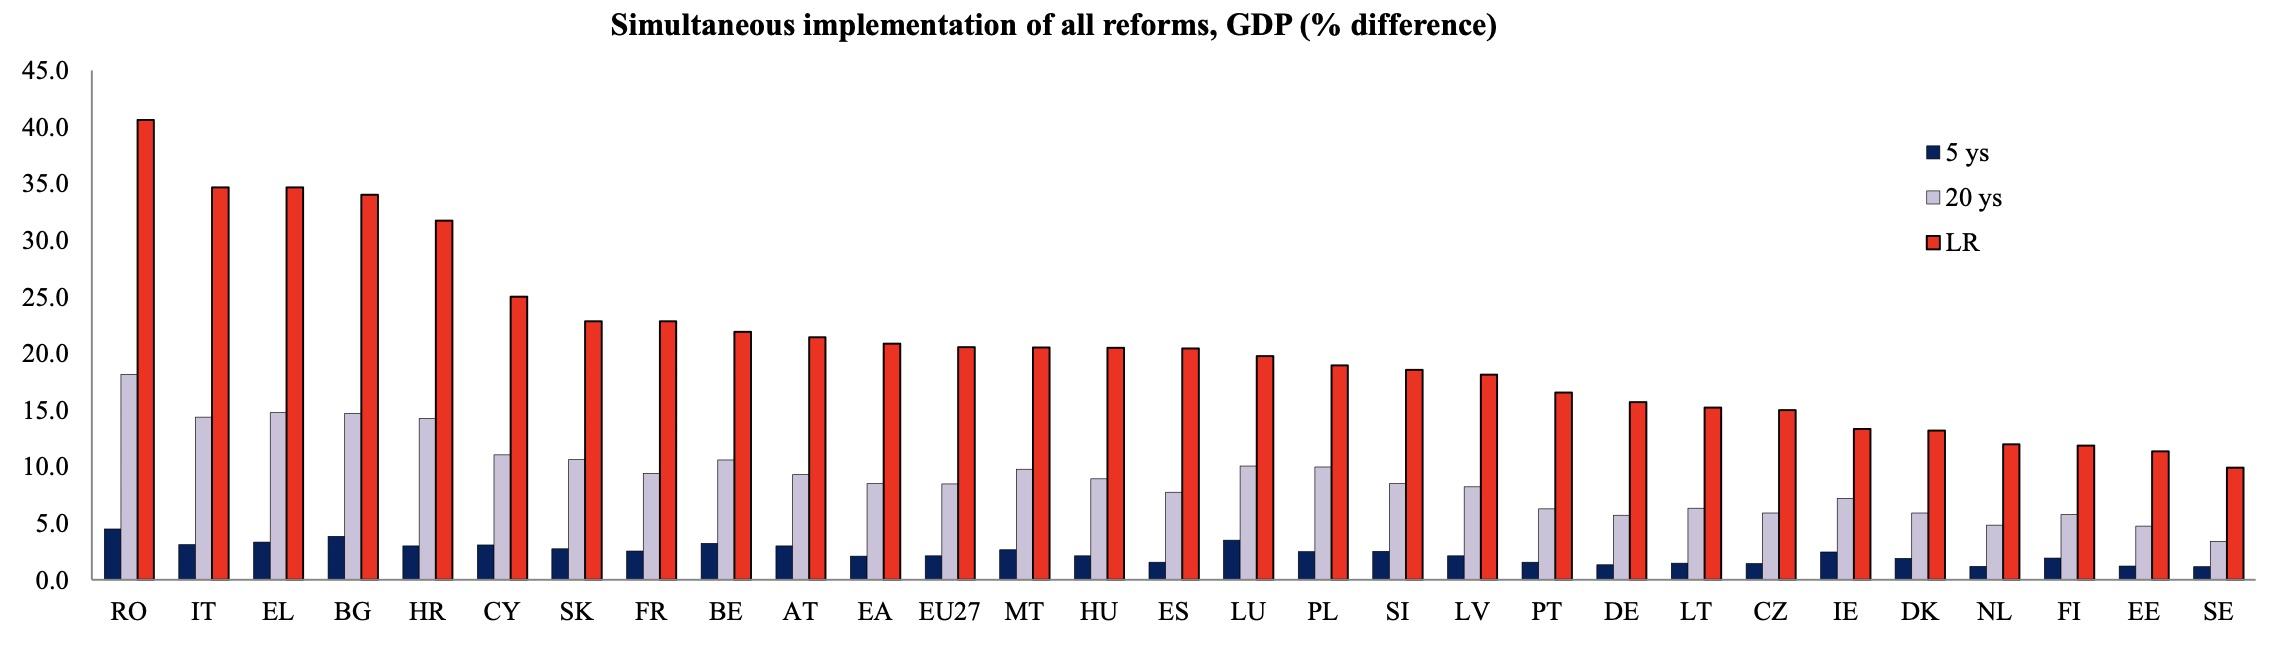 Figure 2 Joint implementation of all reforms across the EU, by member state